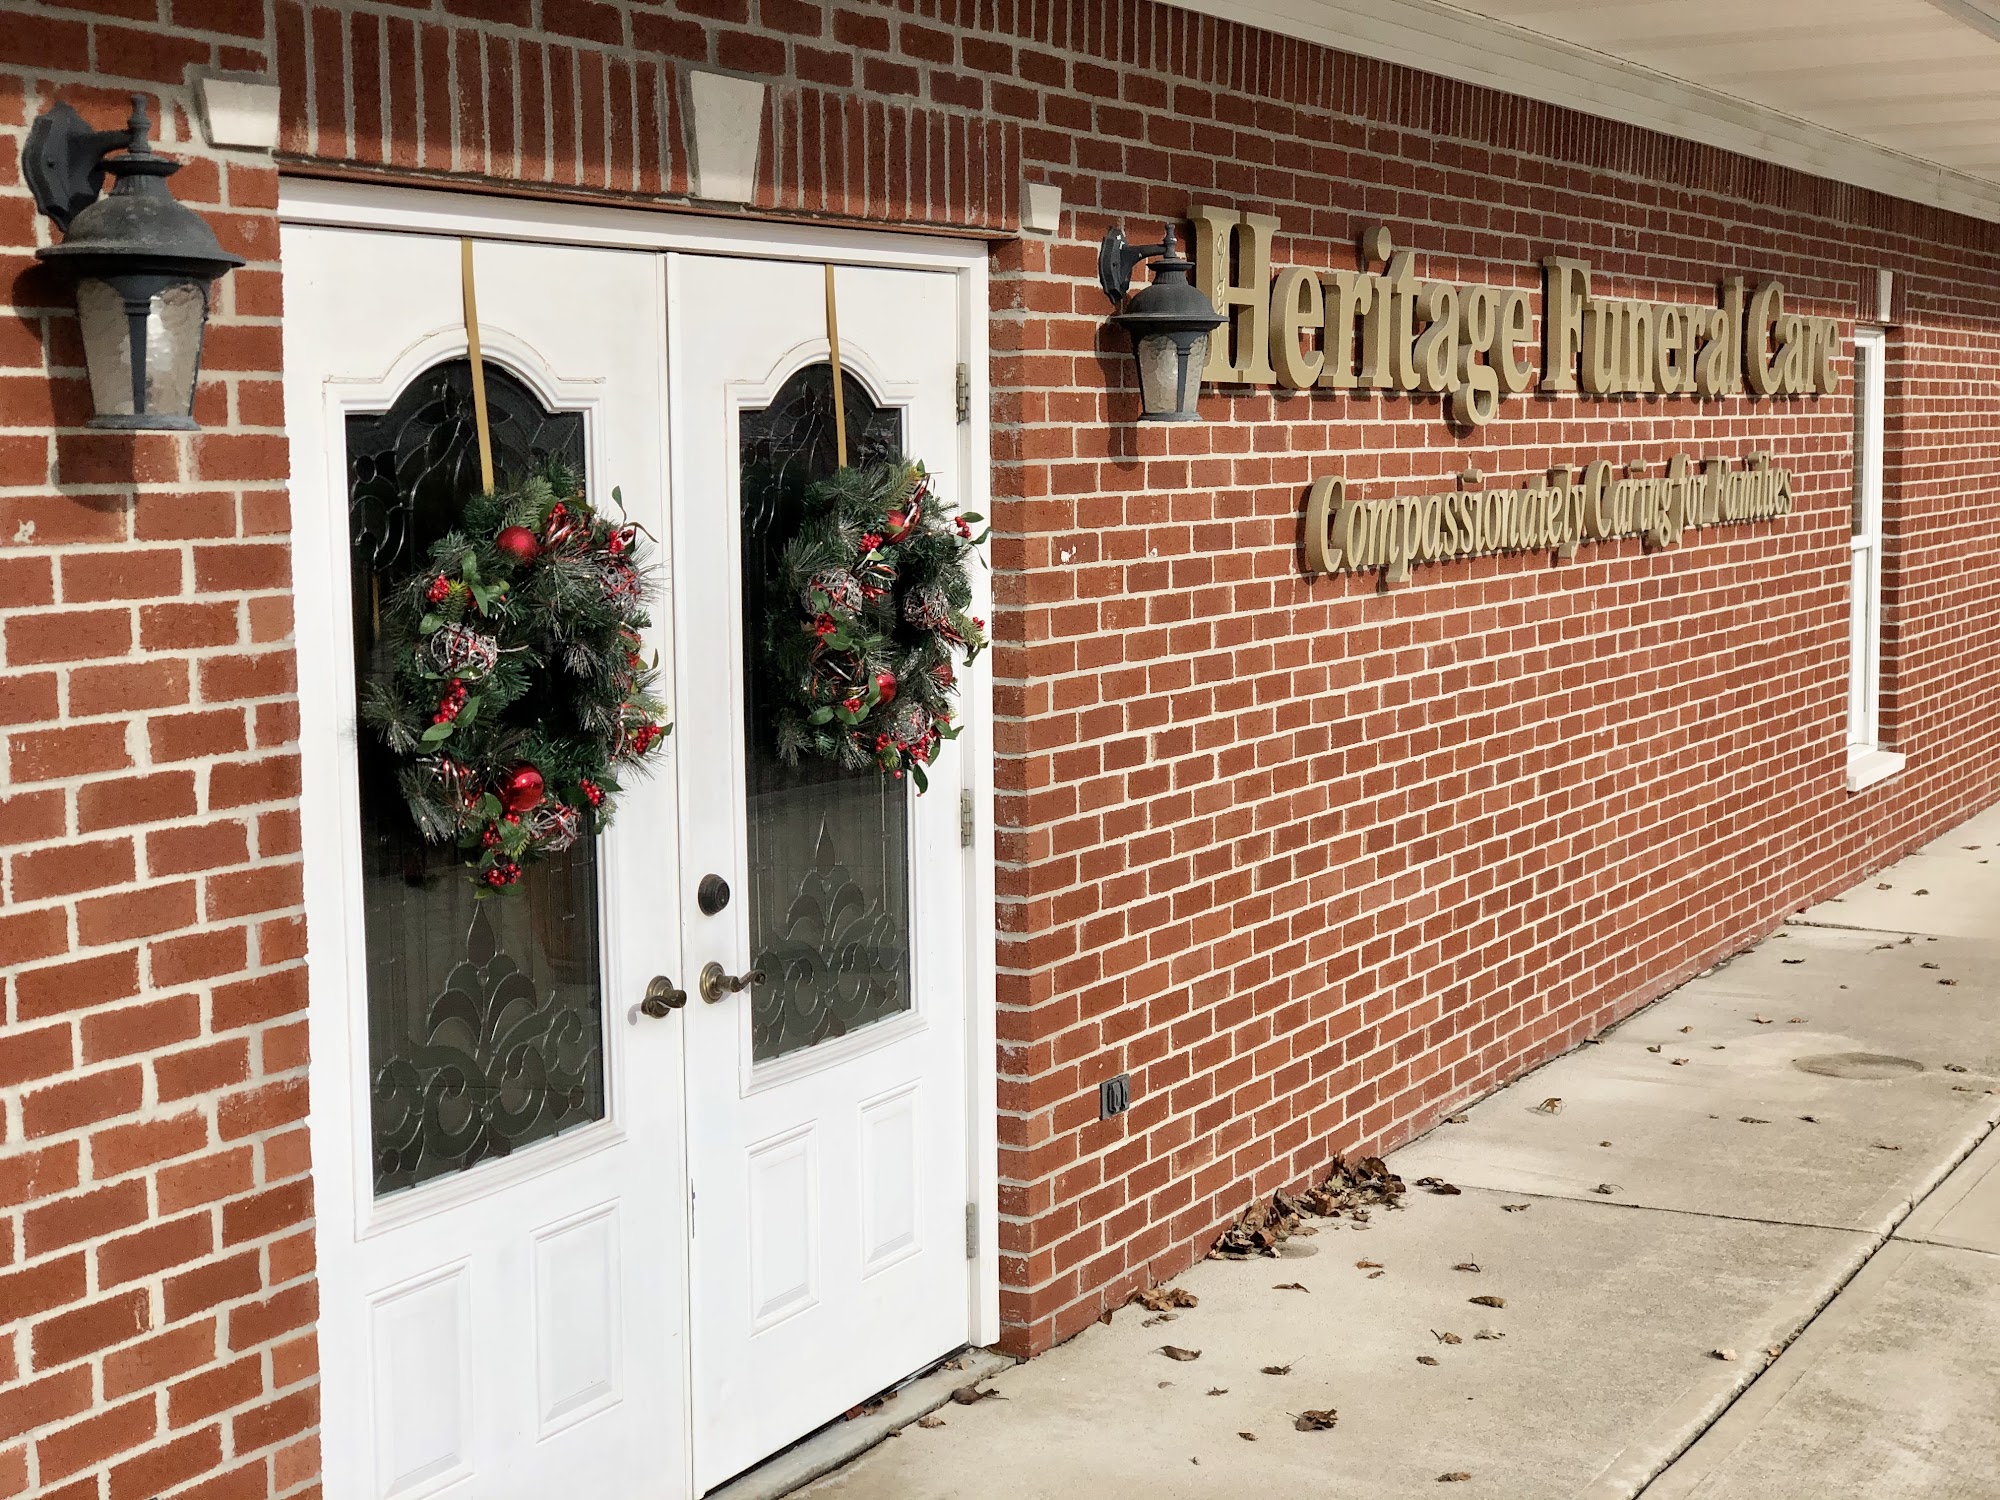 Heritage Funeral Care